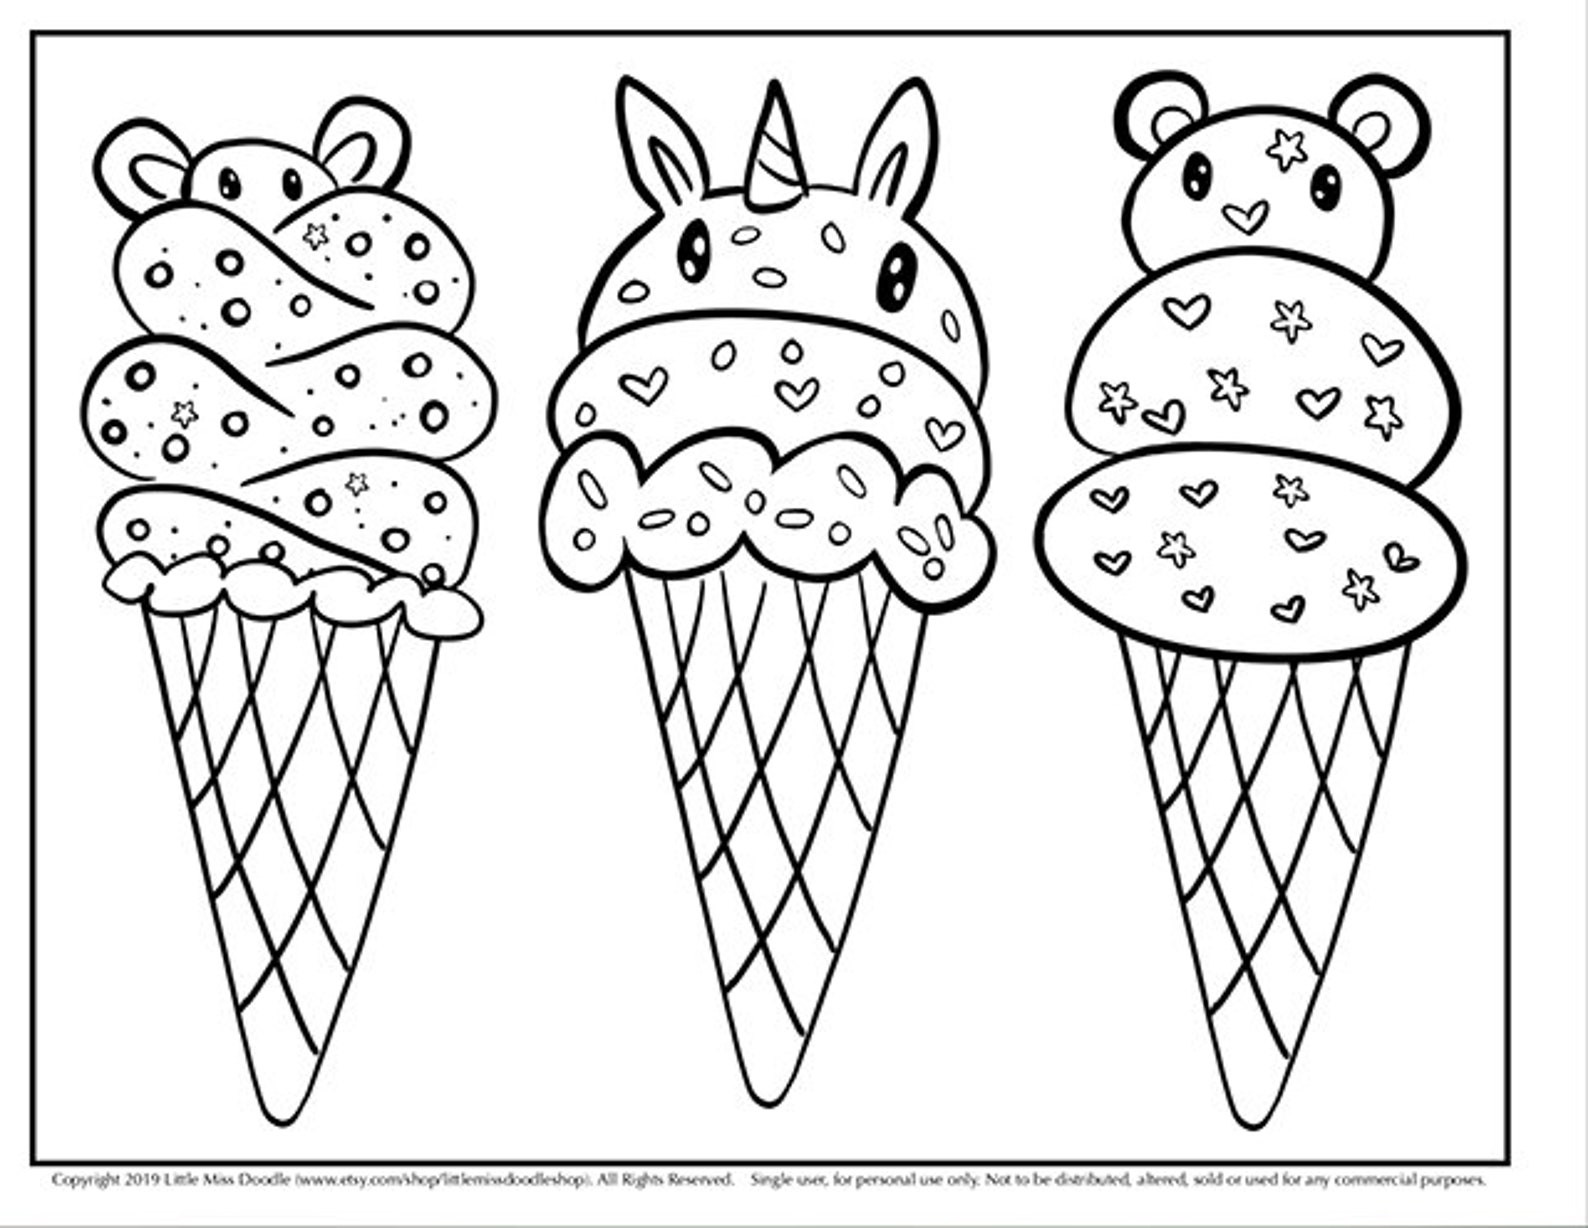 Ice Cream Trio Doodle Printable Cute Kawaii Coloring Page for Kids and Adul...